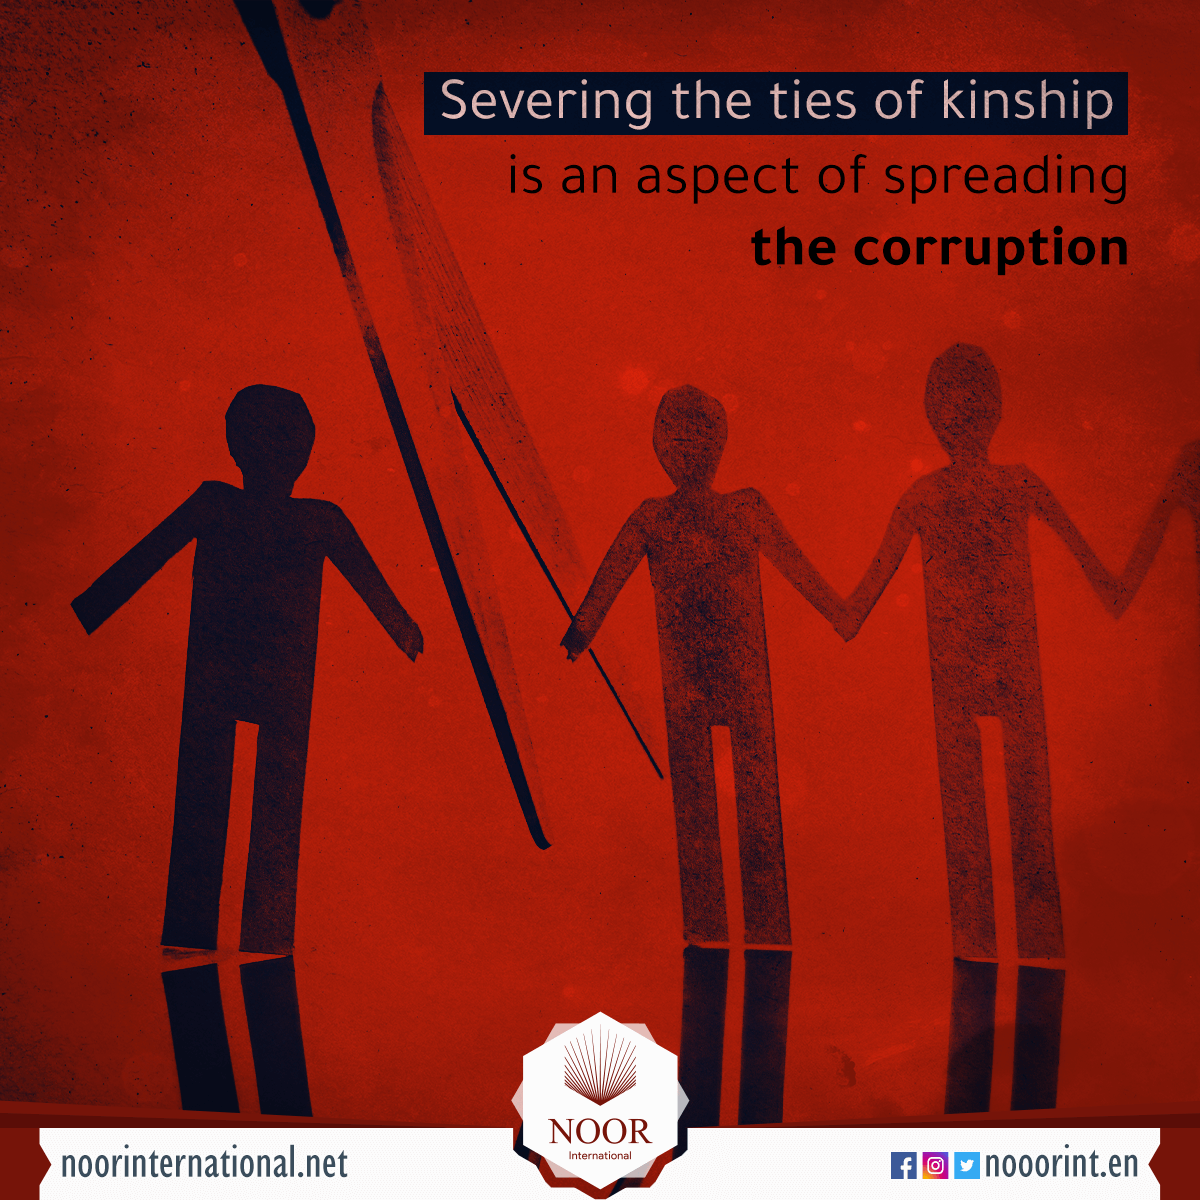 Severing the ties of kinship is an aspect of spreading the corruption